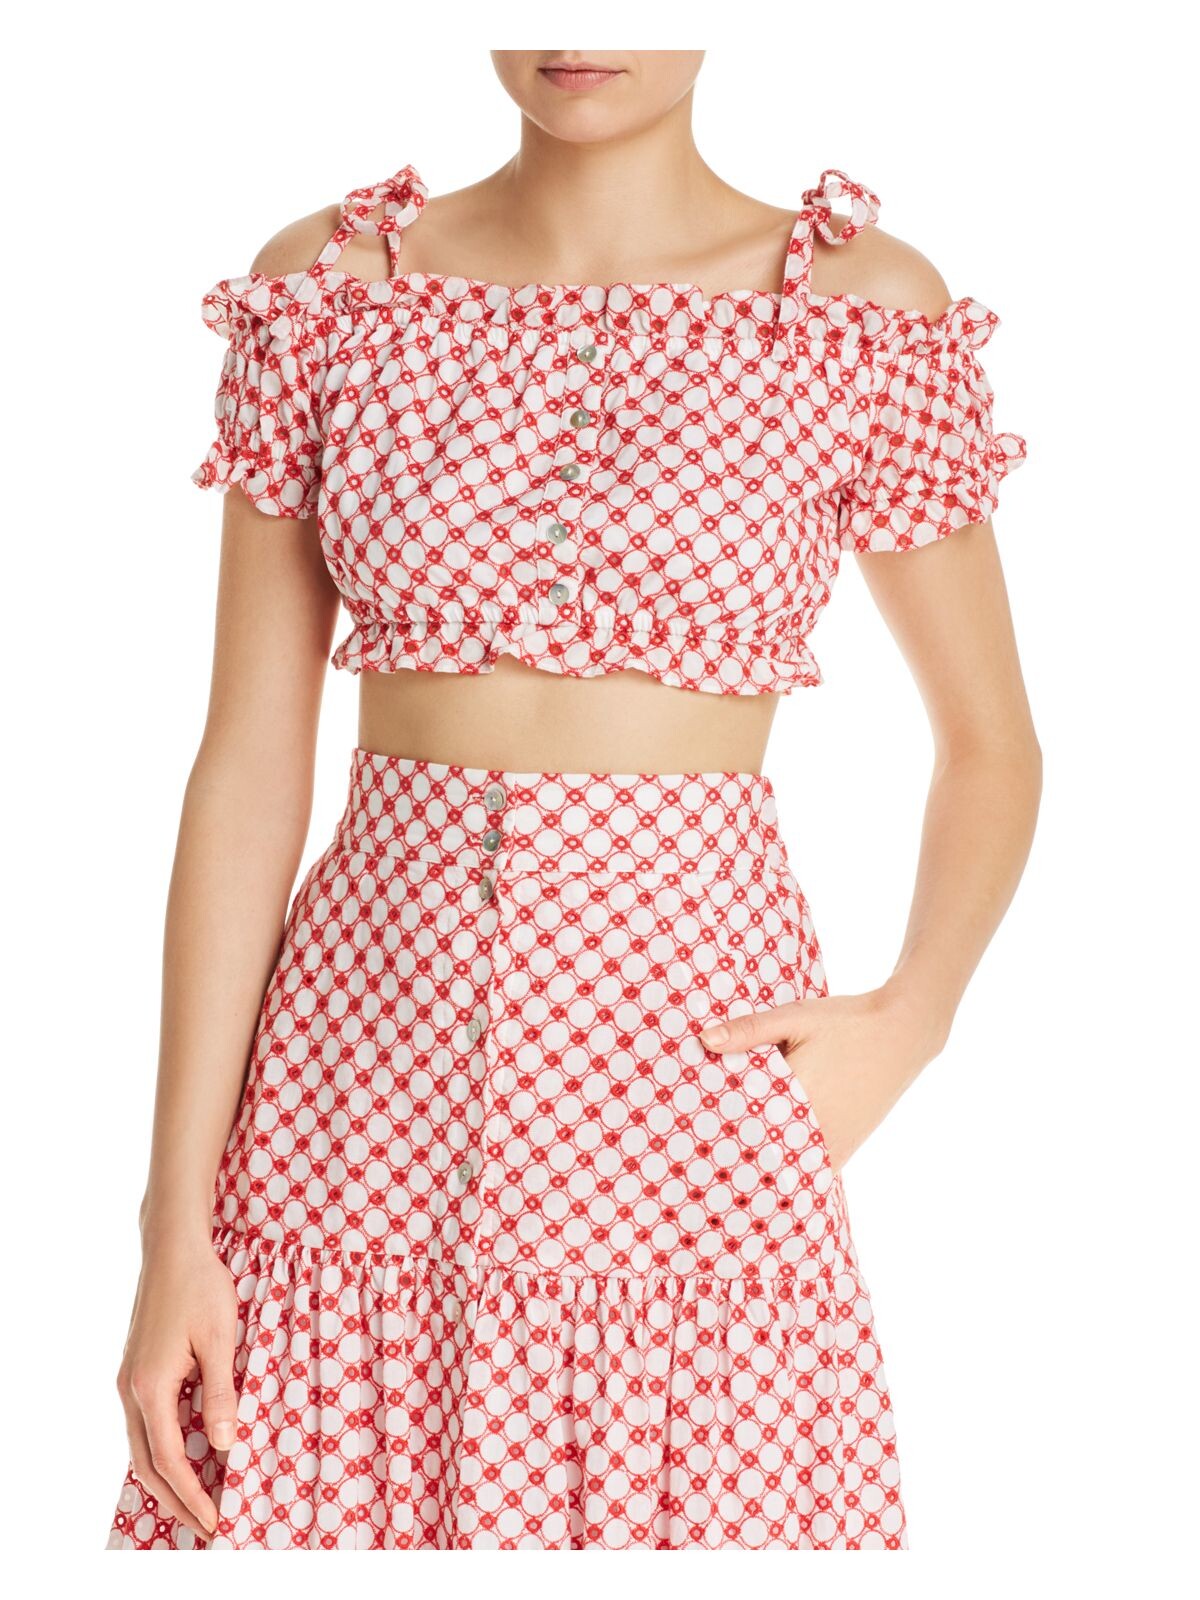 PALOMABLUE Womens Red Ruffled Polka Dot Pouf Off Shoulder Crop Top Size: M